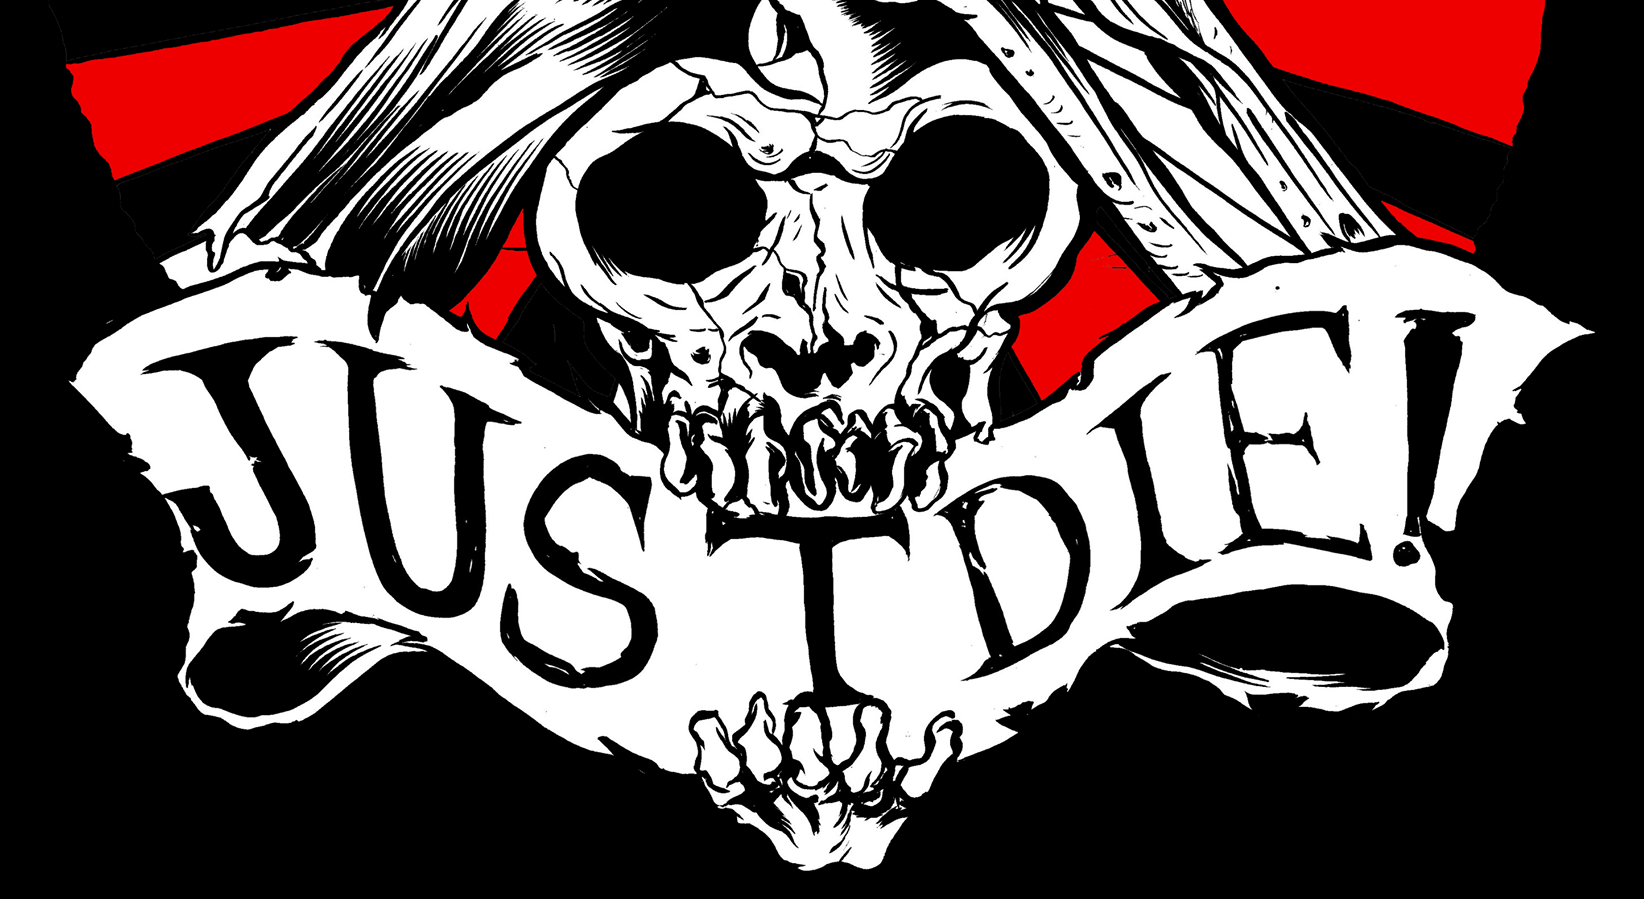 Just Die! of Asheville, NC